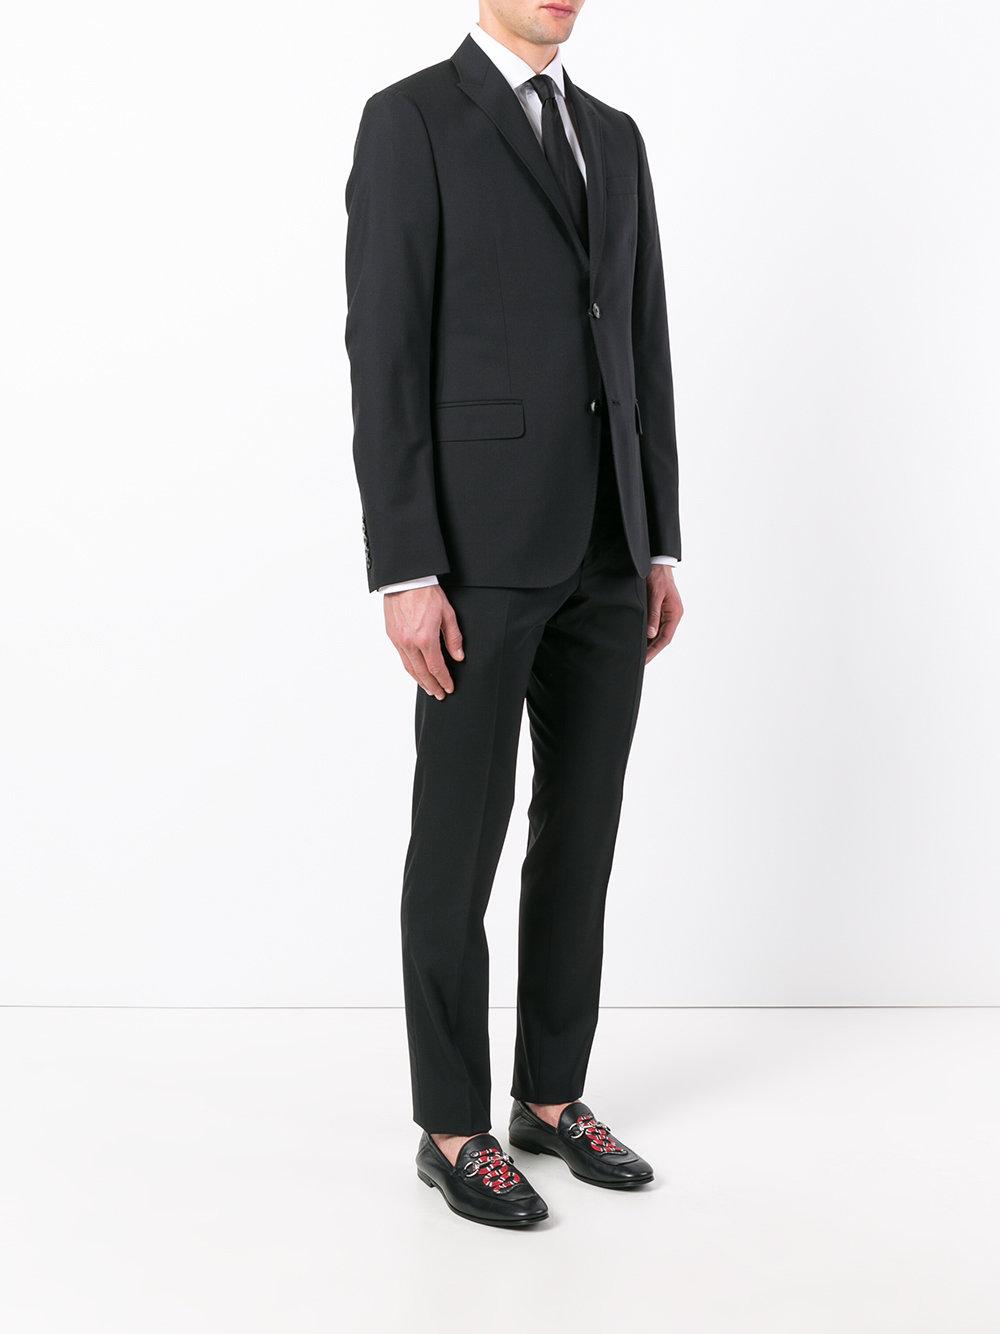 Gucci Men's Suiting